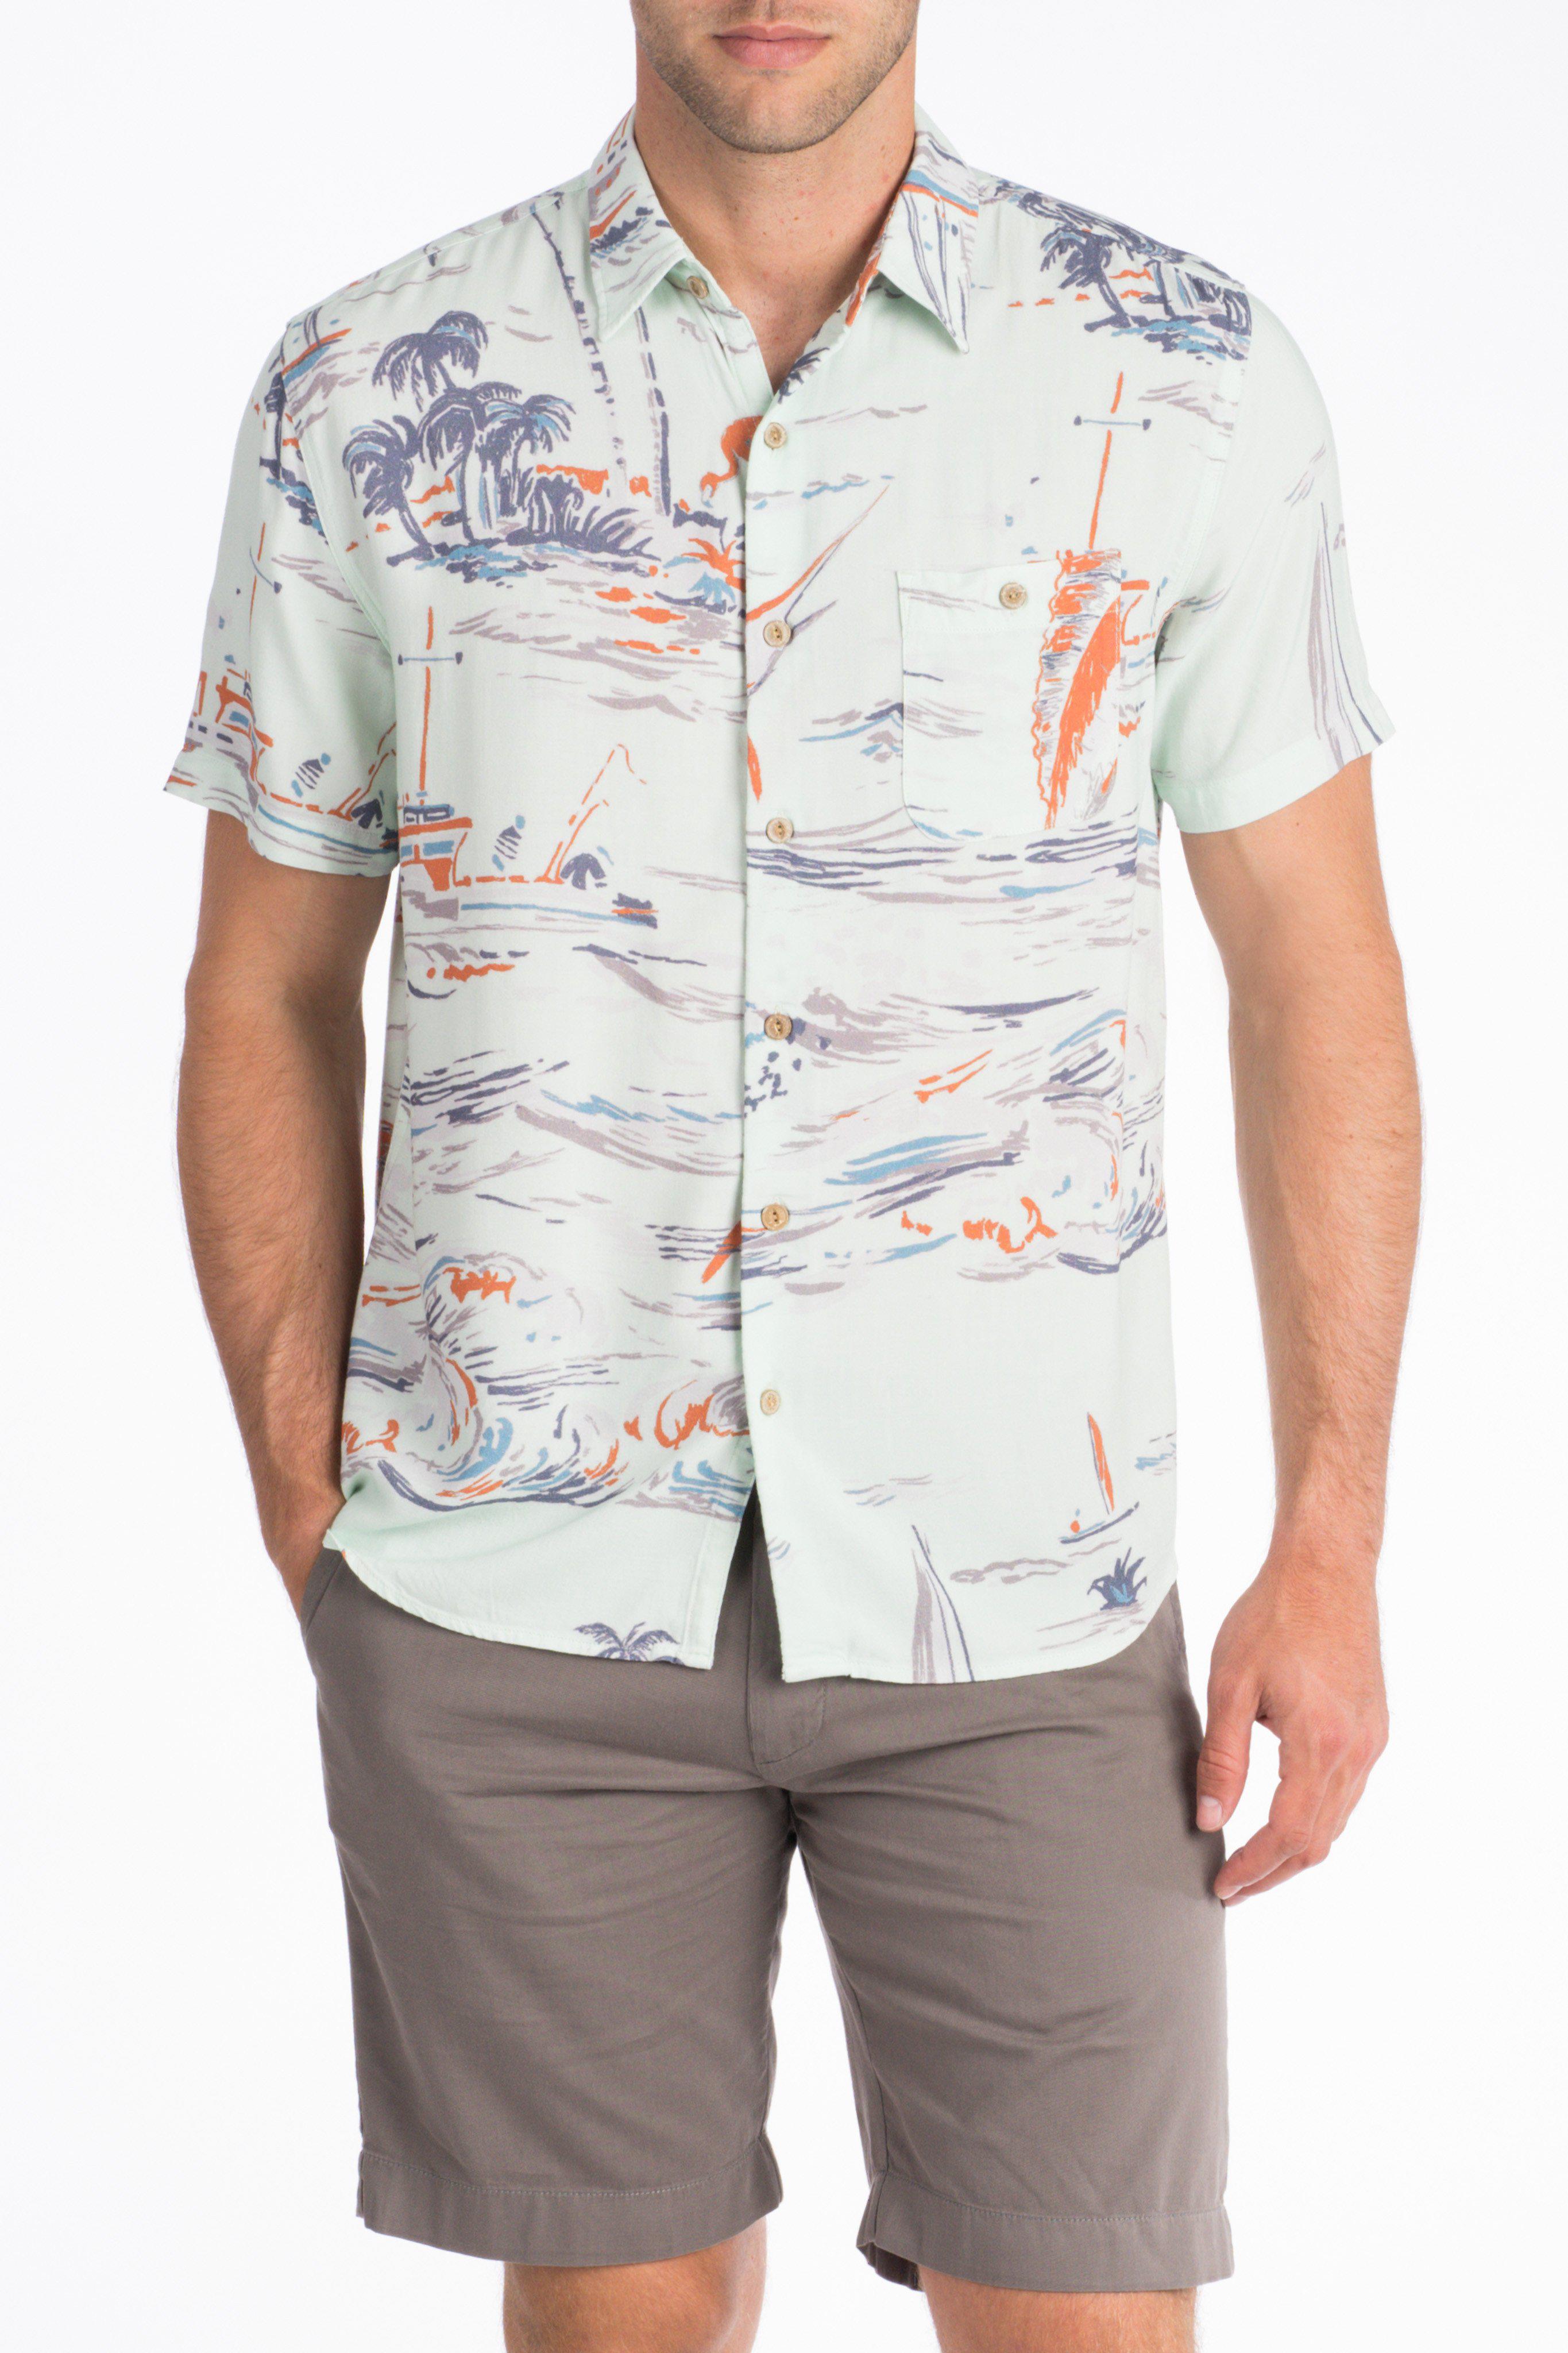 Lyst - Faherty Brand Rayon Hawaiian Shirt in White for Men